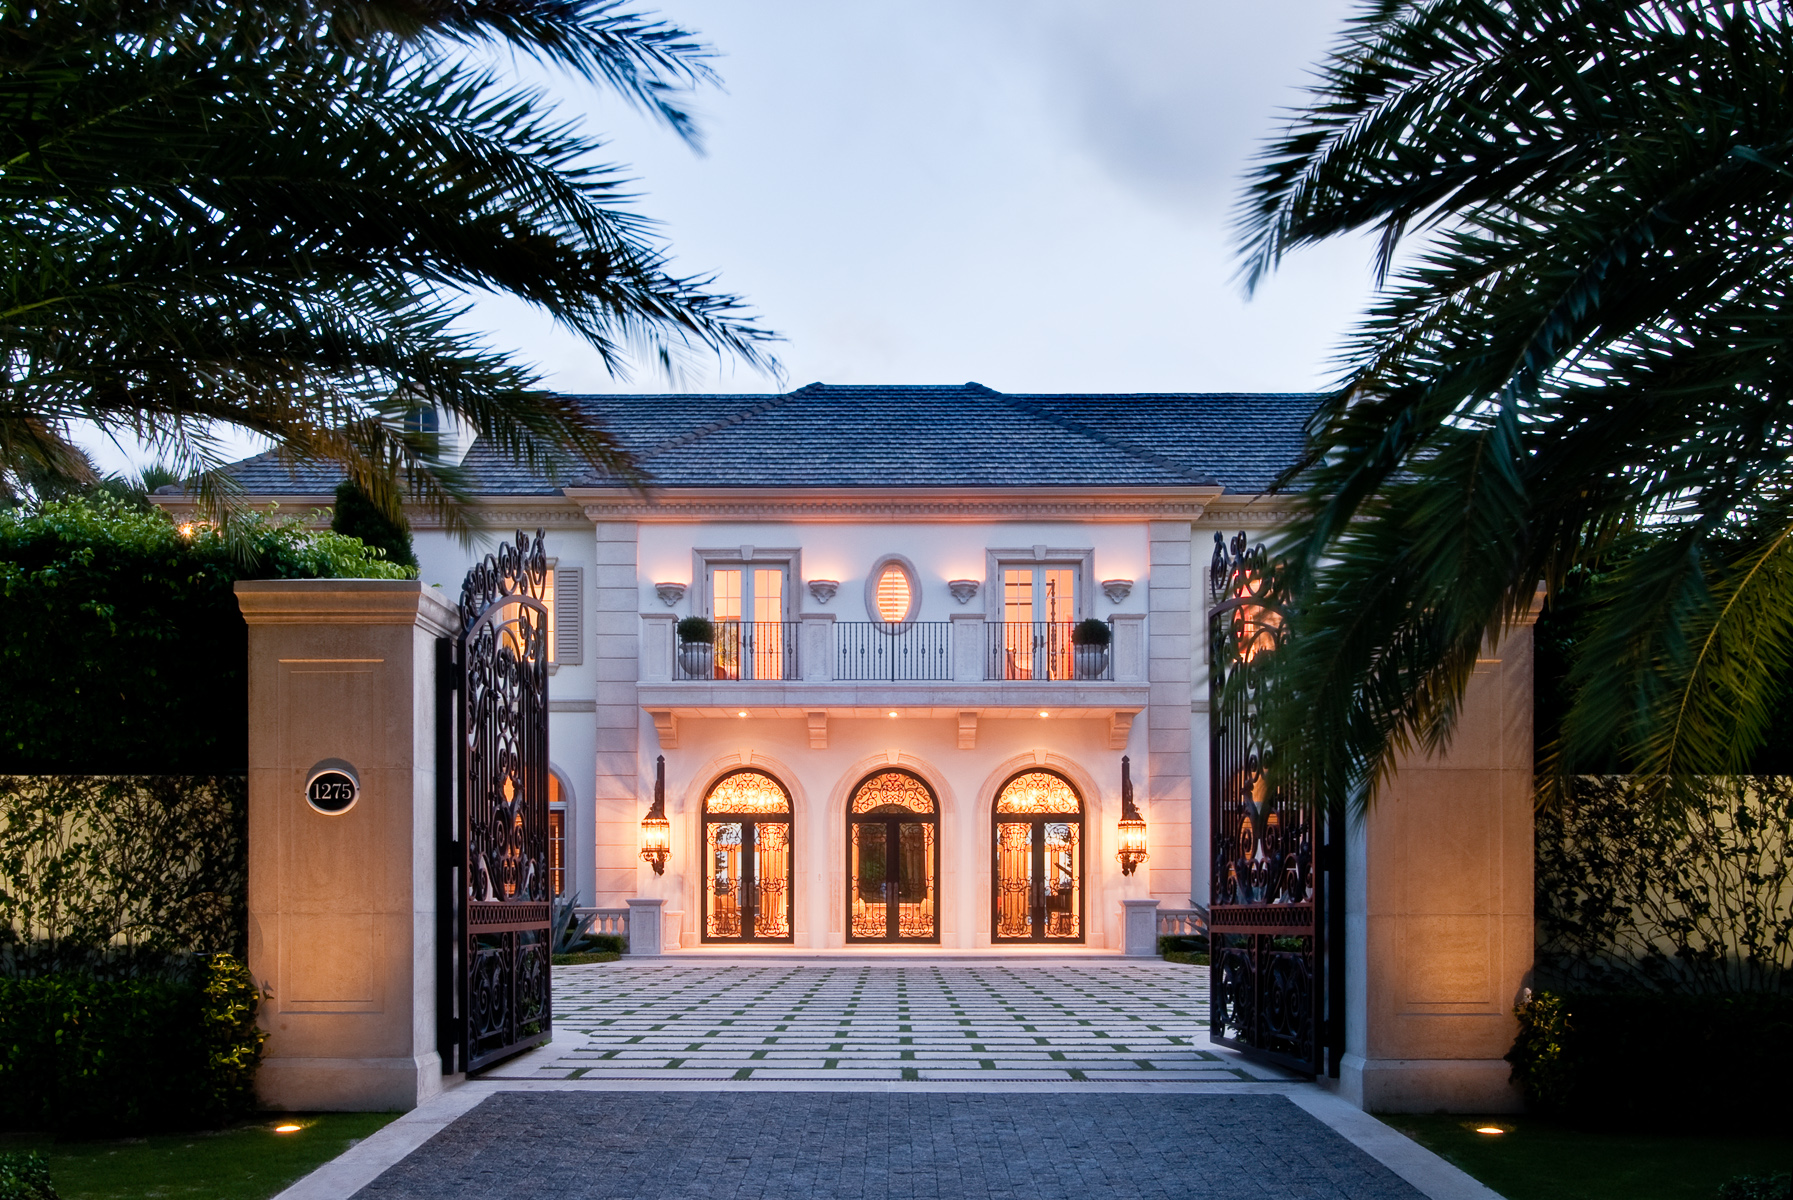 a mansion with a gated entrance and palm trees.